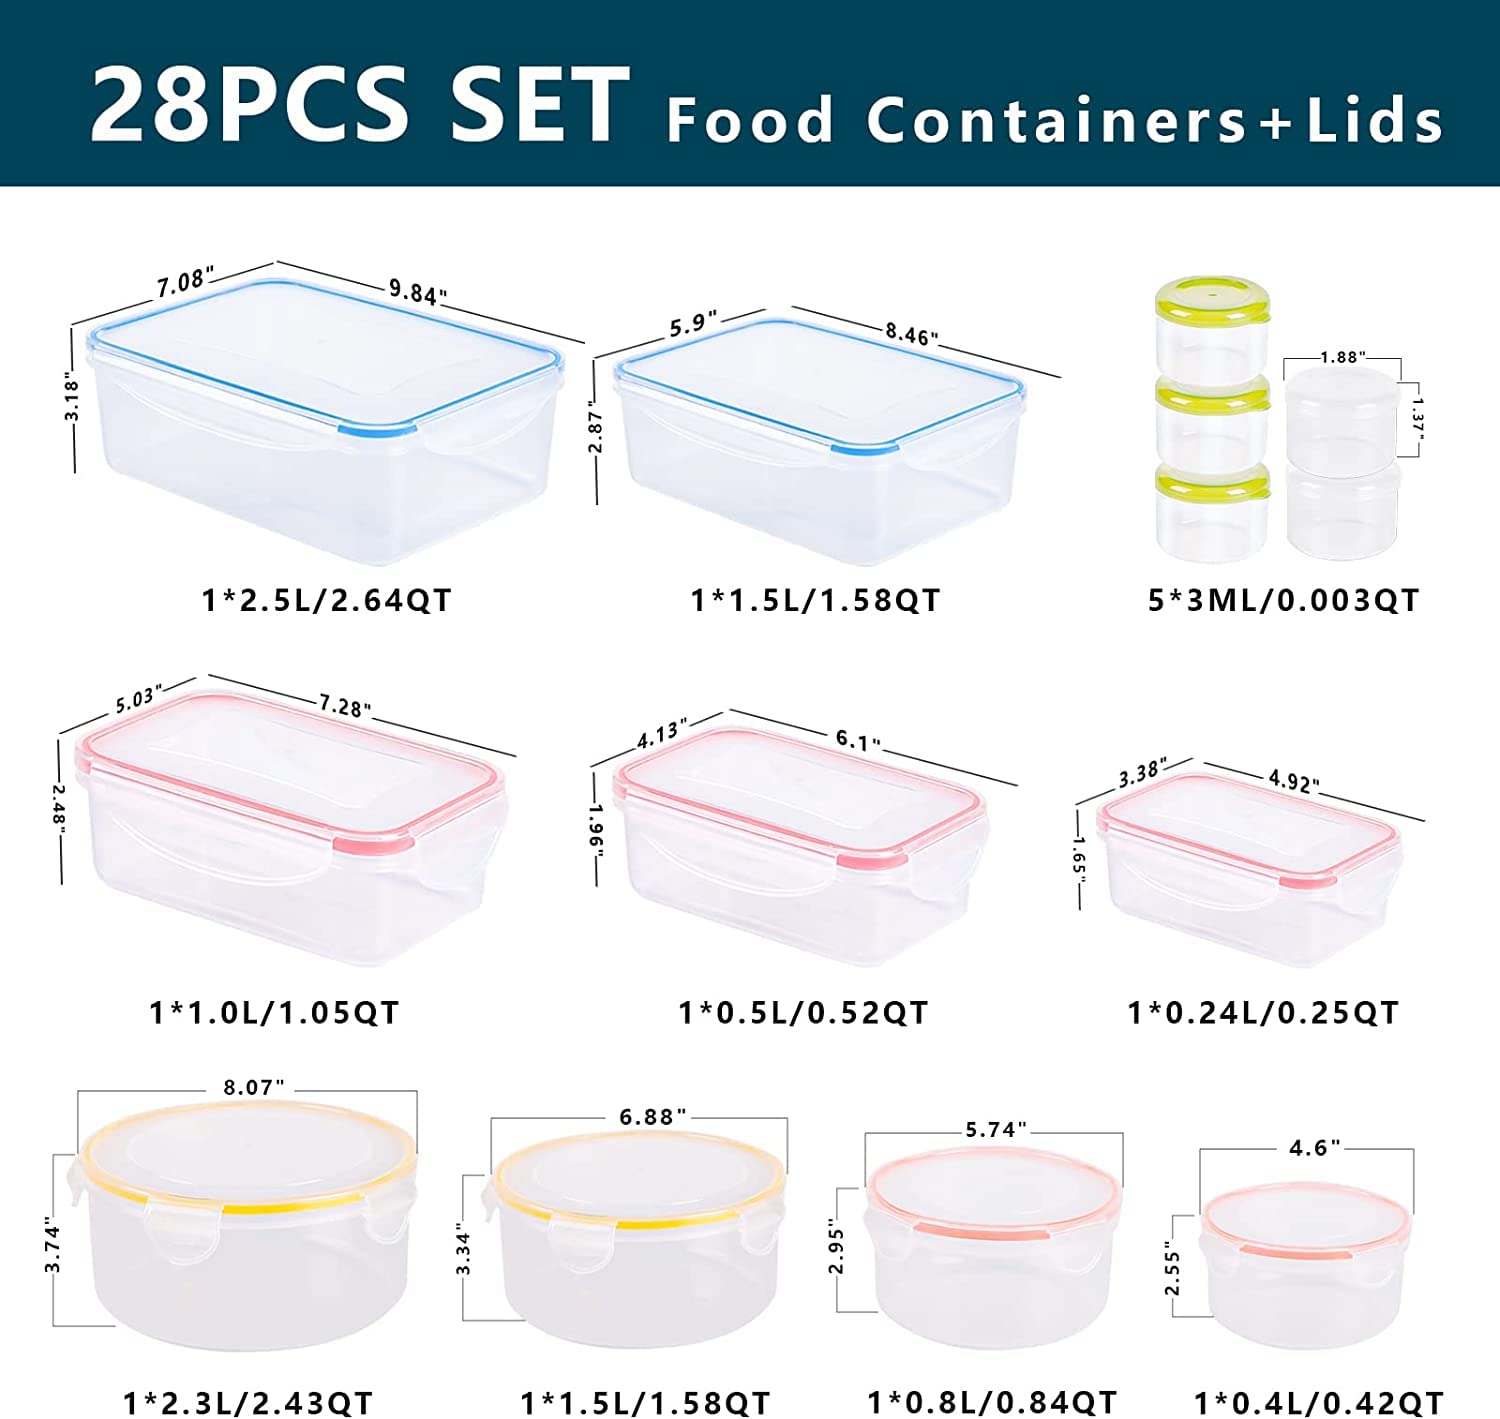 Food Storage Containers with Lids Airtight 14 PCS, Plastic Food Containers for Pantry & Kitchen Organization, BPA Free, Leak Proof, Freezer & Microwave & Dishwasher Safe